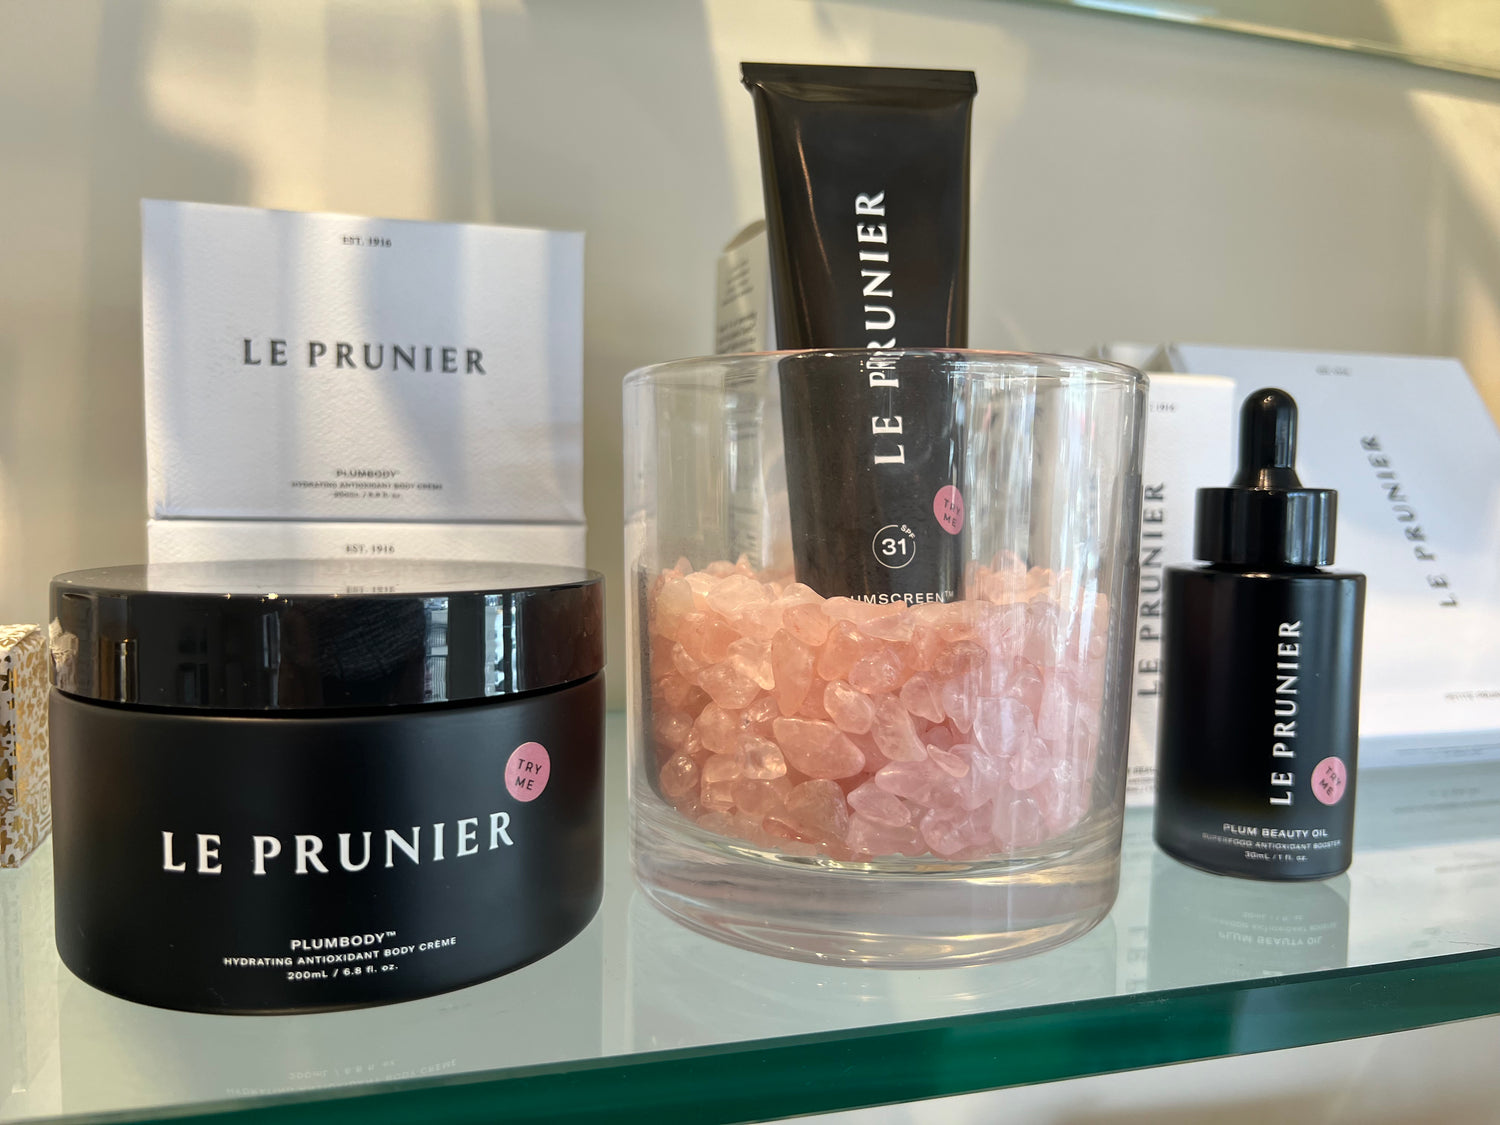 Le Prunier products